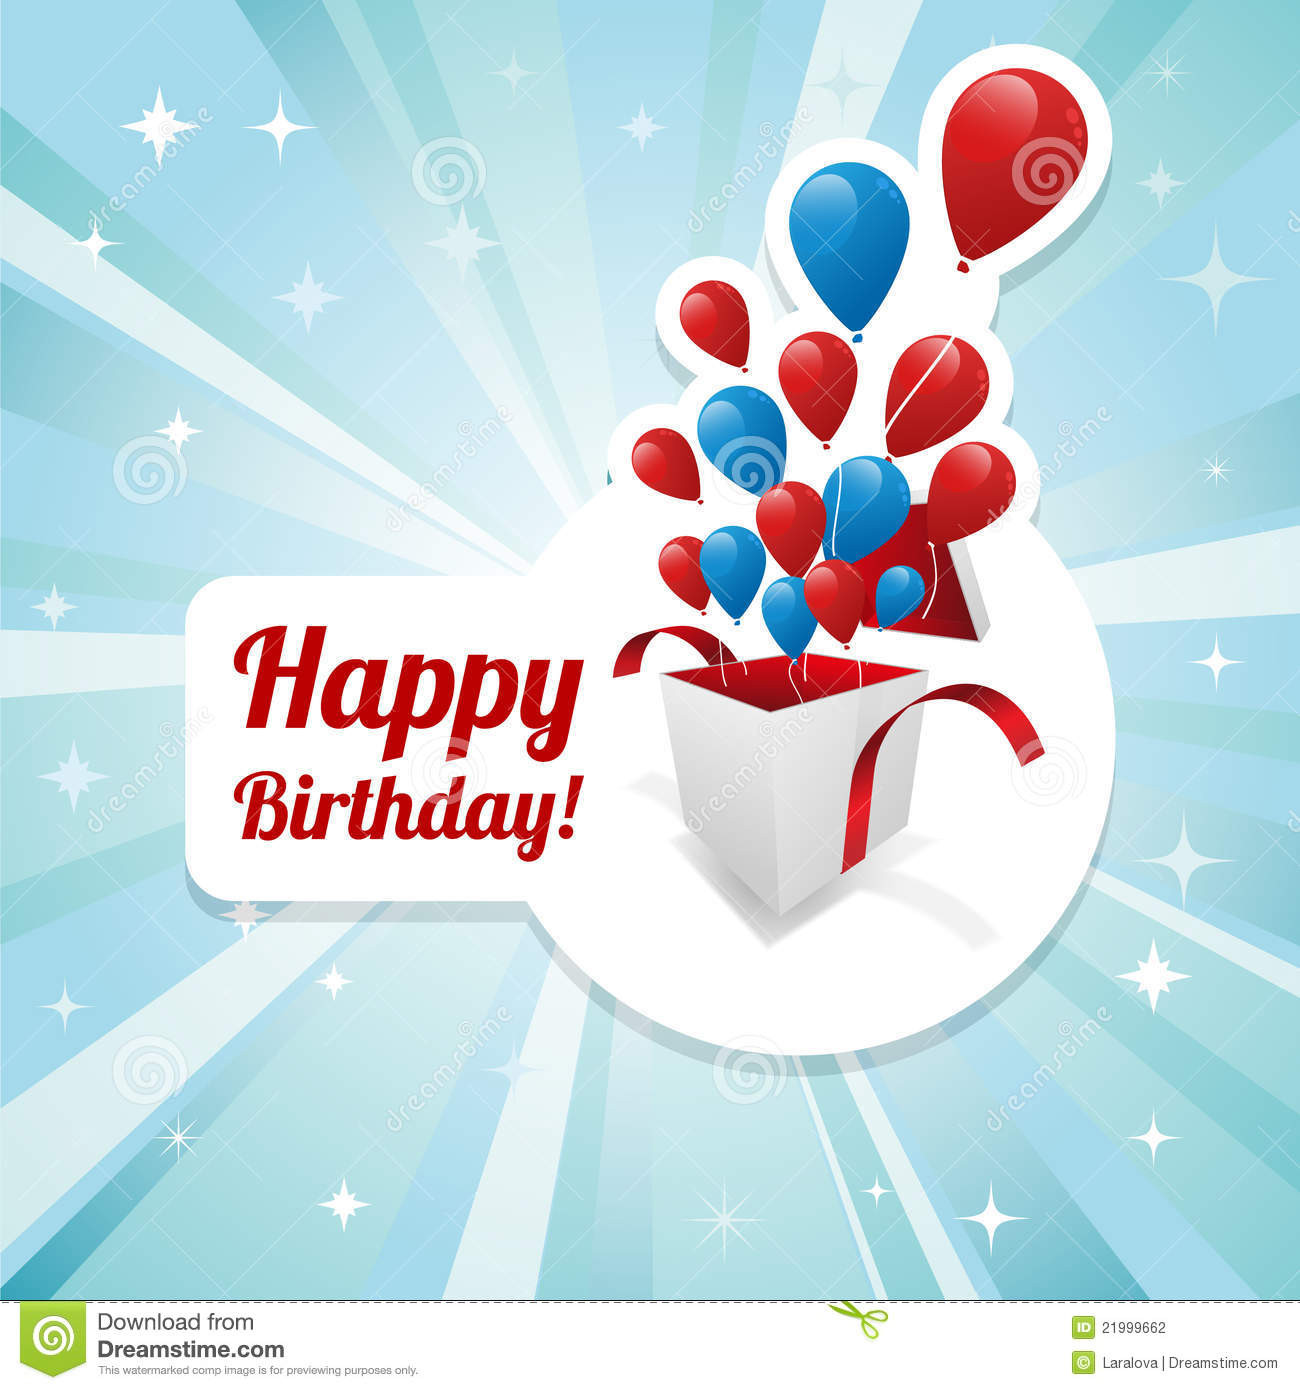 Birthday Card Images
 Illustration For Happy Birthday Card Stock Vector